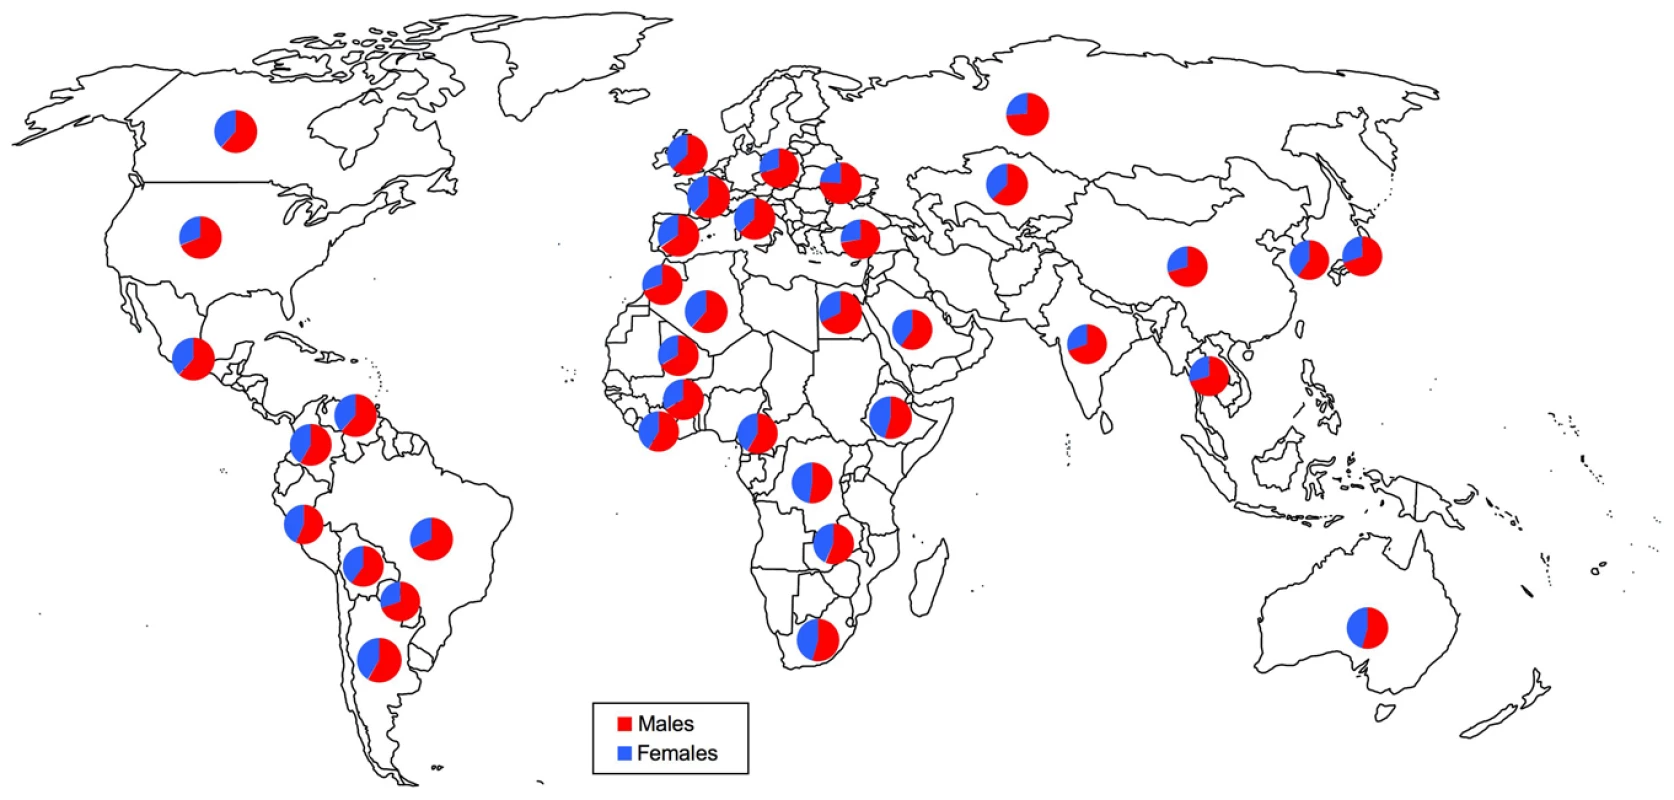 Sex distribution for new smear-positive TB case notification in 2007 in various countries &lt;em class=&quot;ref&quot;&gt;[1]&lt;/em&gt;.